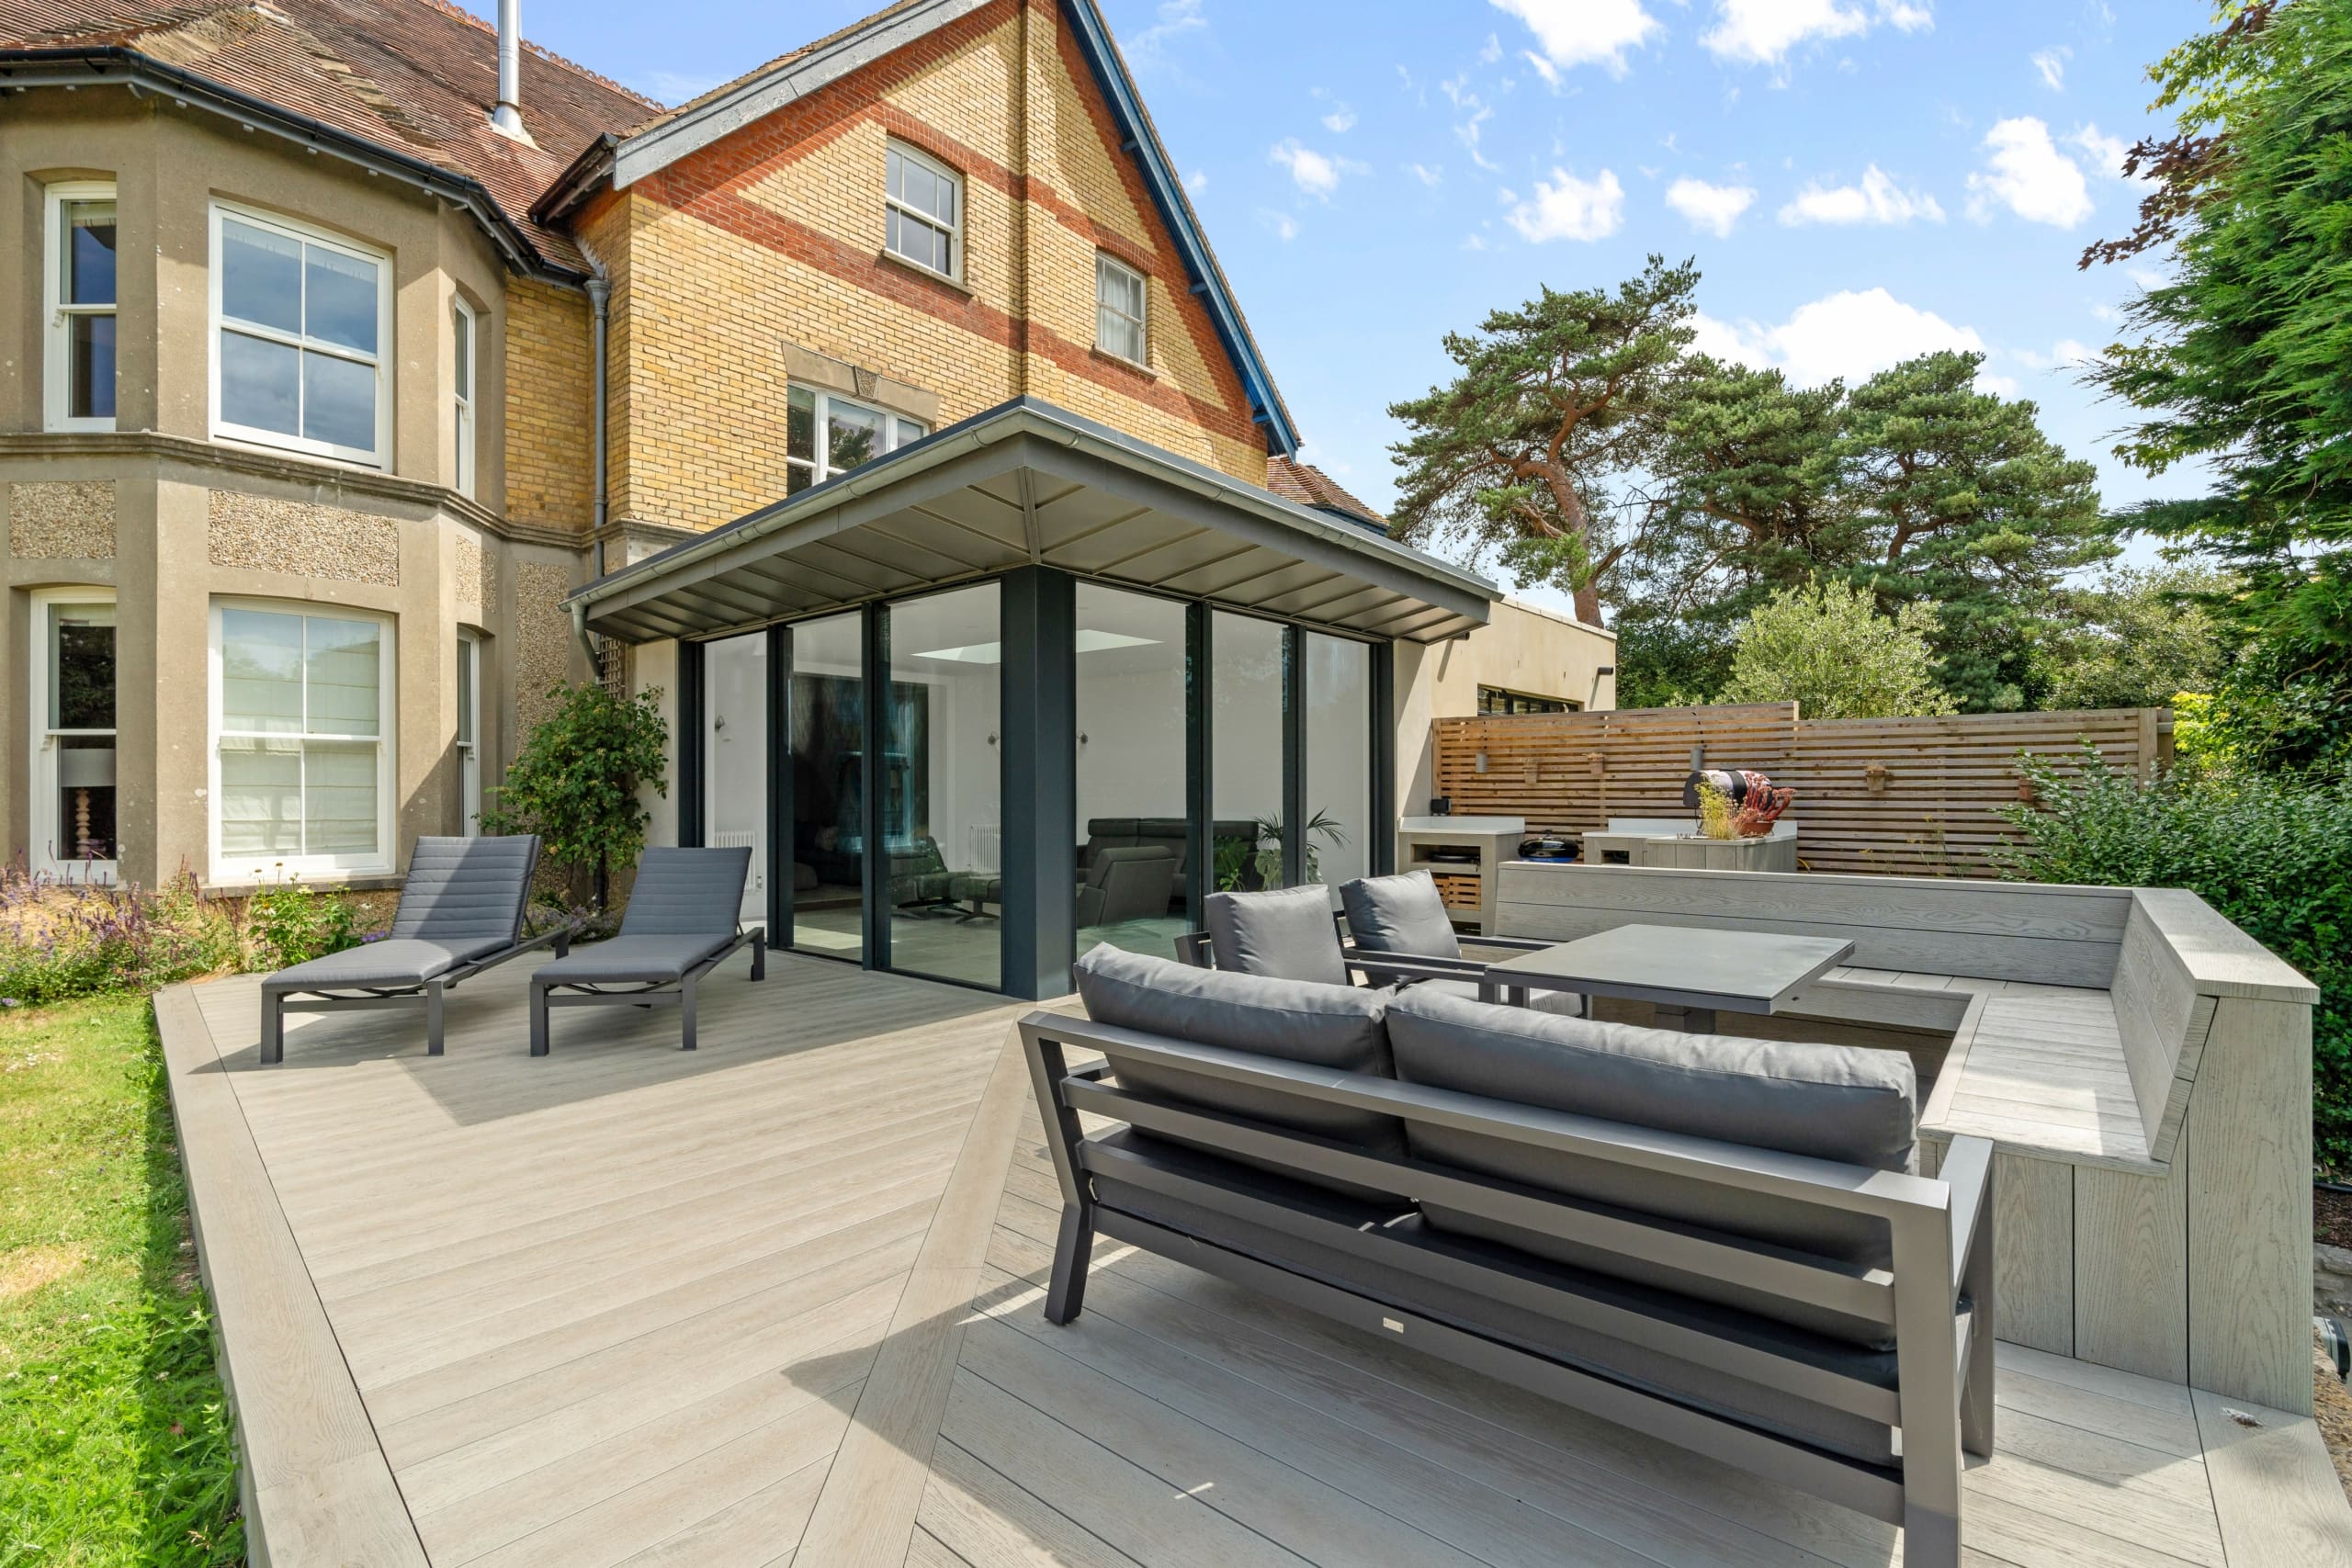 Rear elevation of a substantial home with stunning lightwood decking and garden furniture and modern orangery with sliding doors to each side.